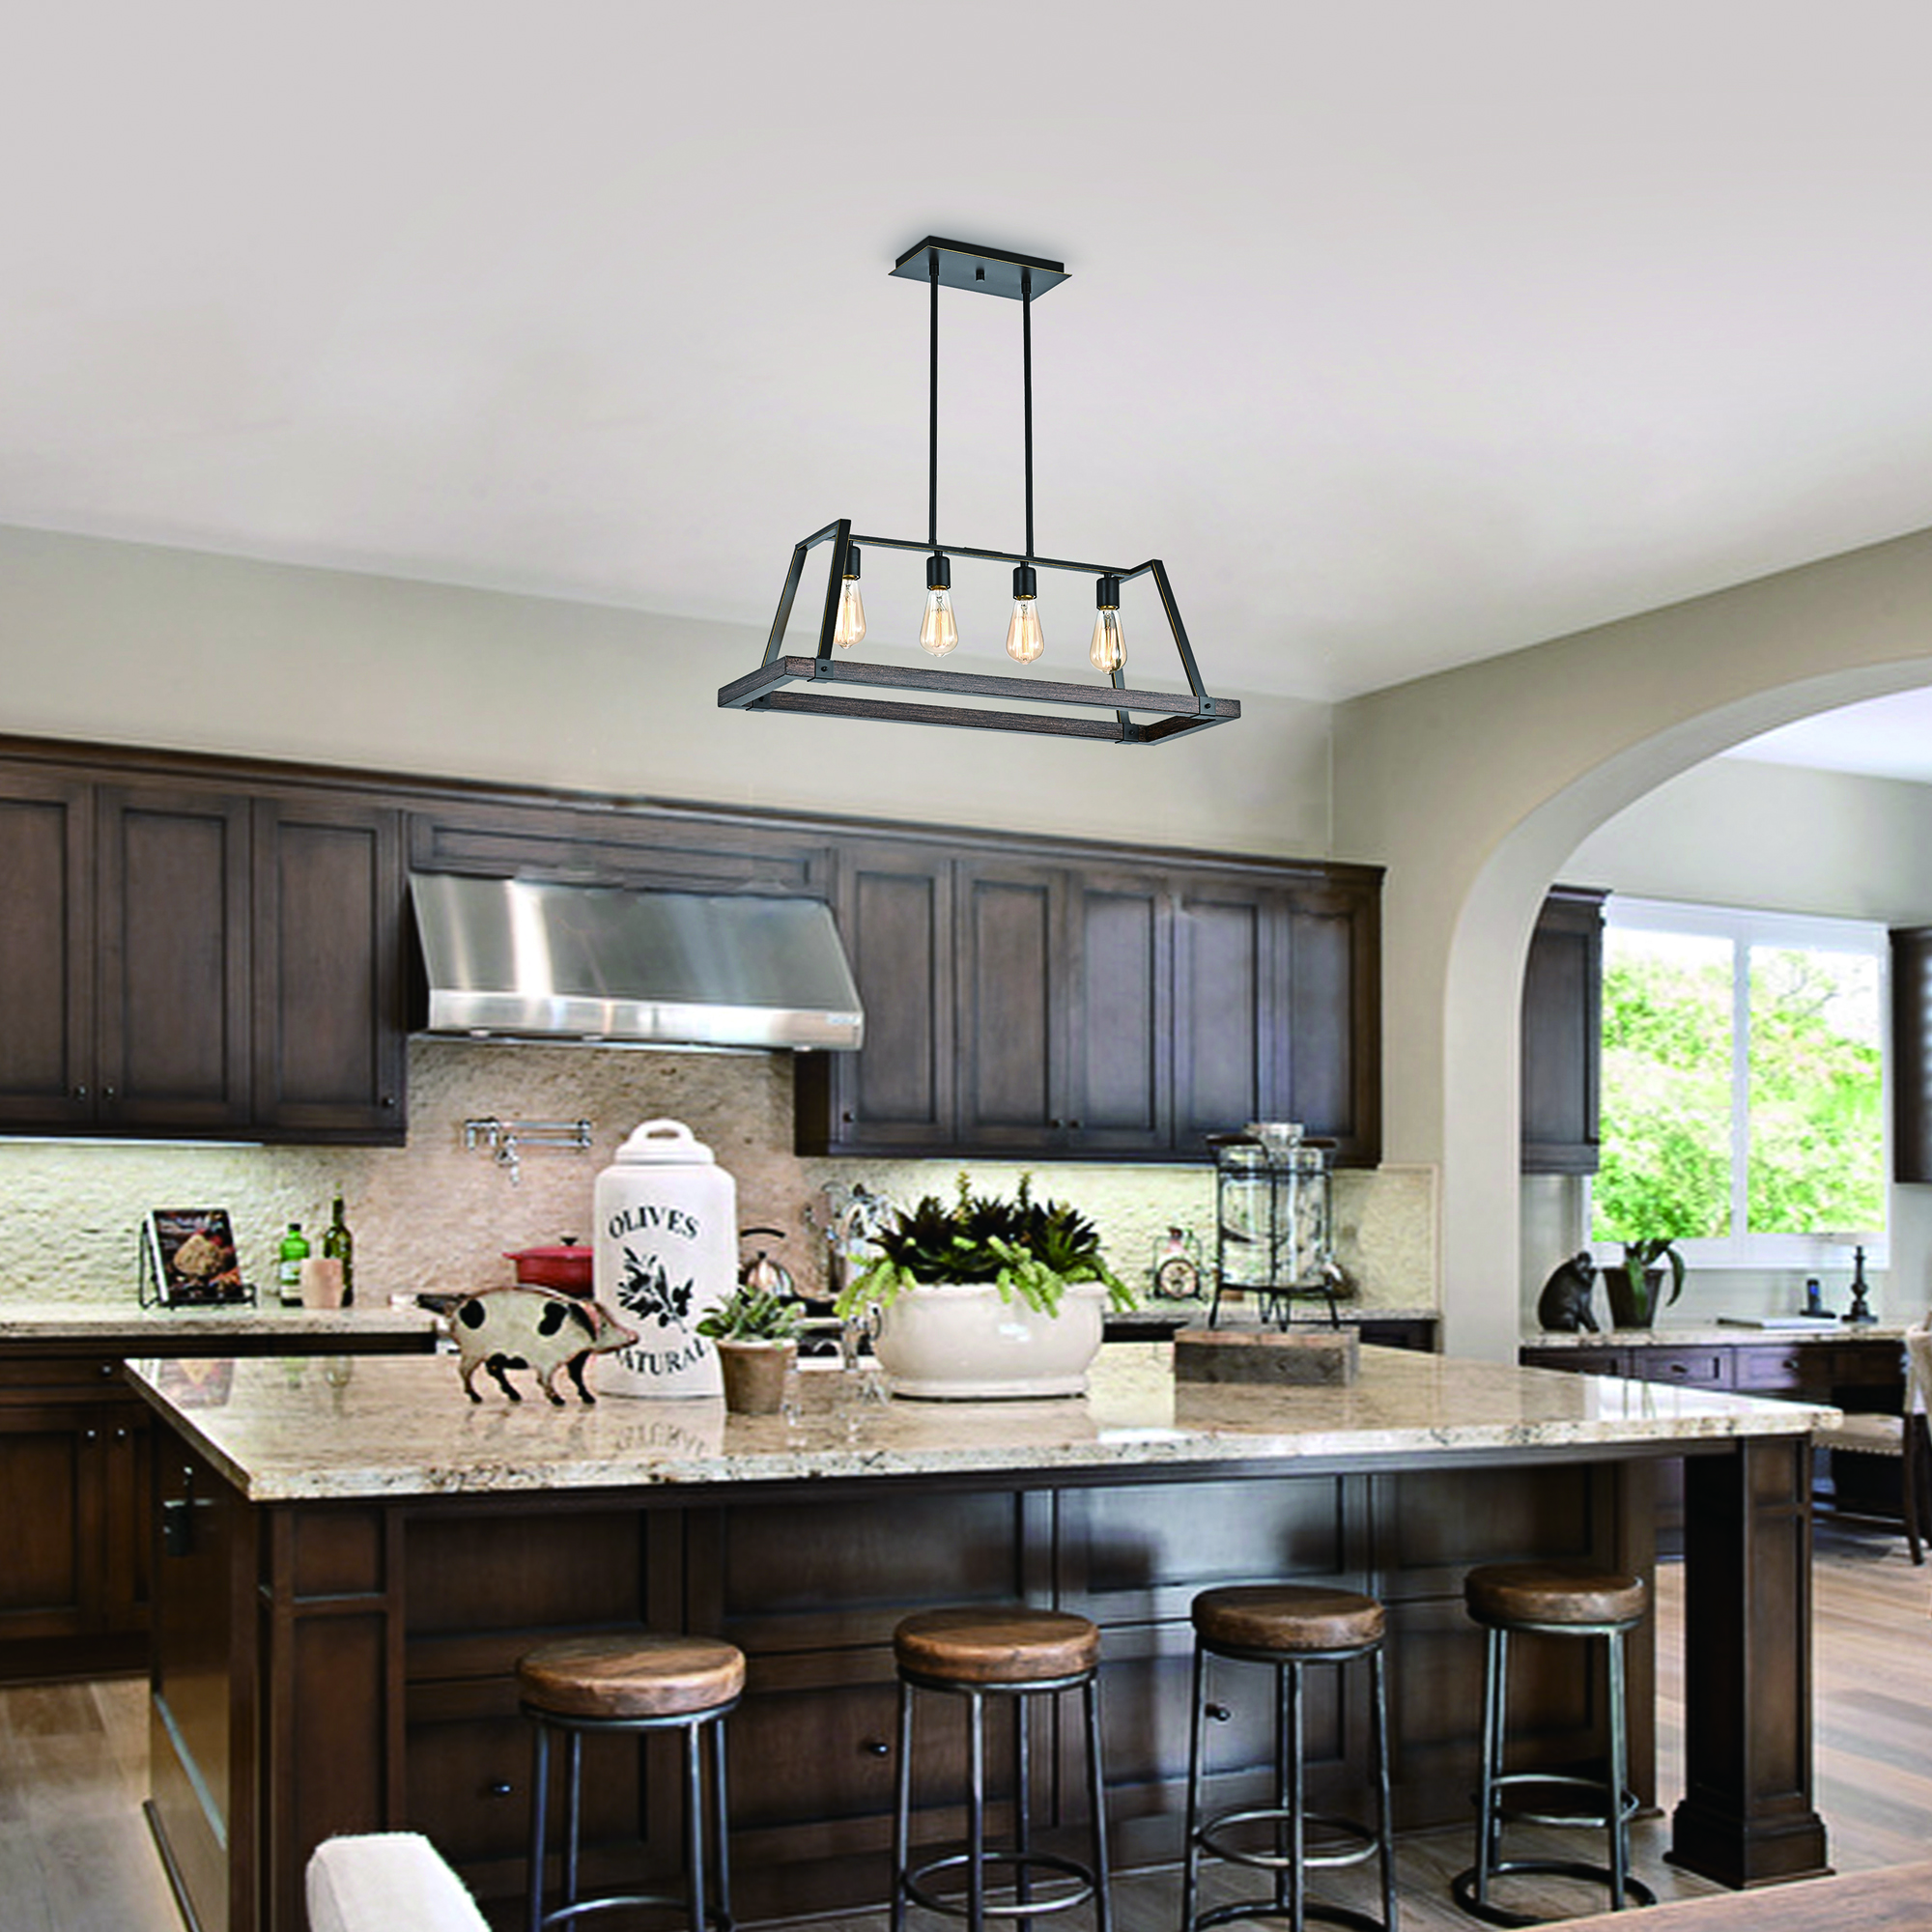 4-light wood and oil rubbed bronze kitchen island chandelier